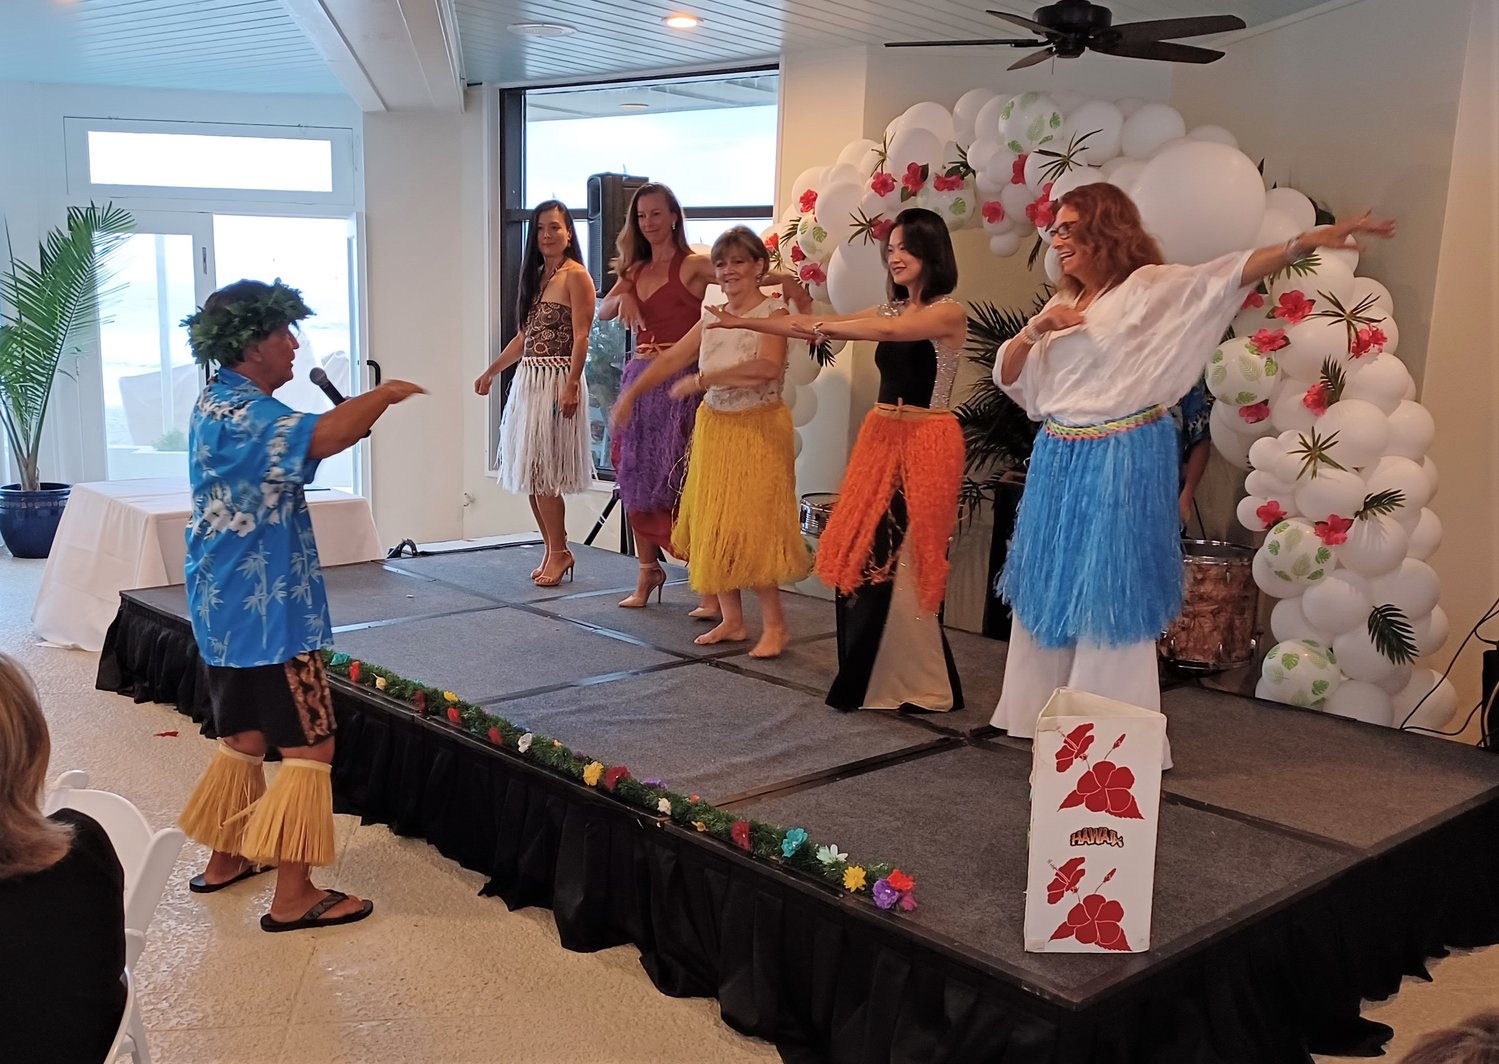 Entertainment at Beaches, A Celebration of the Arts included hula lessons for some of the guests.